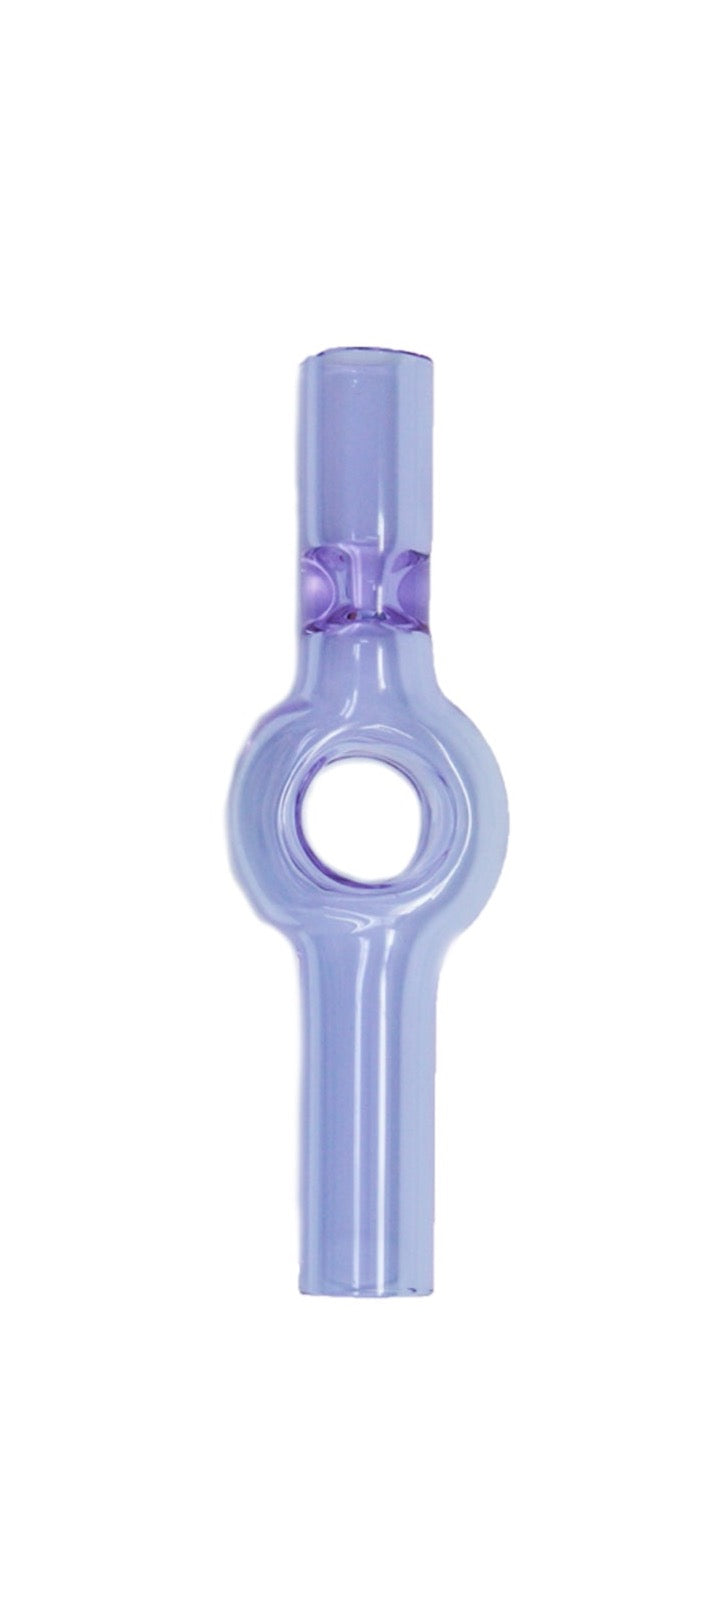 Purple glass pipe by Laundry Day, available at www.cuemars.com